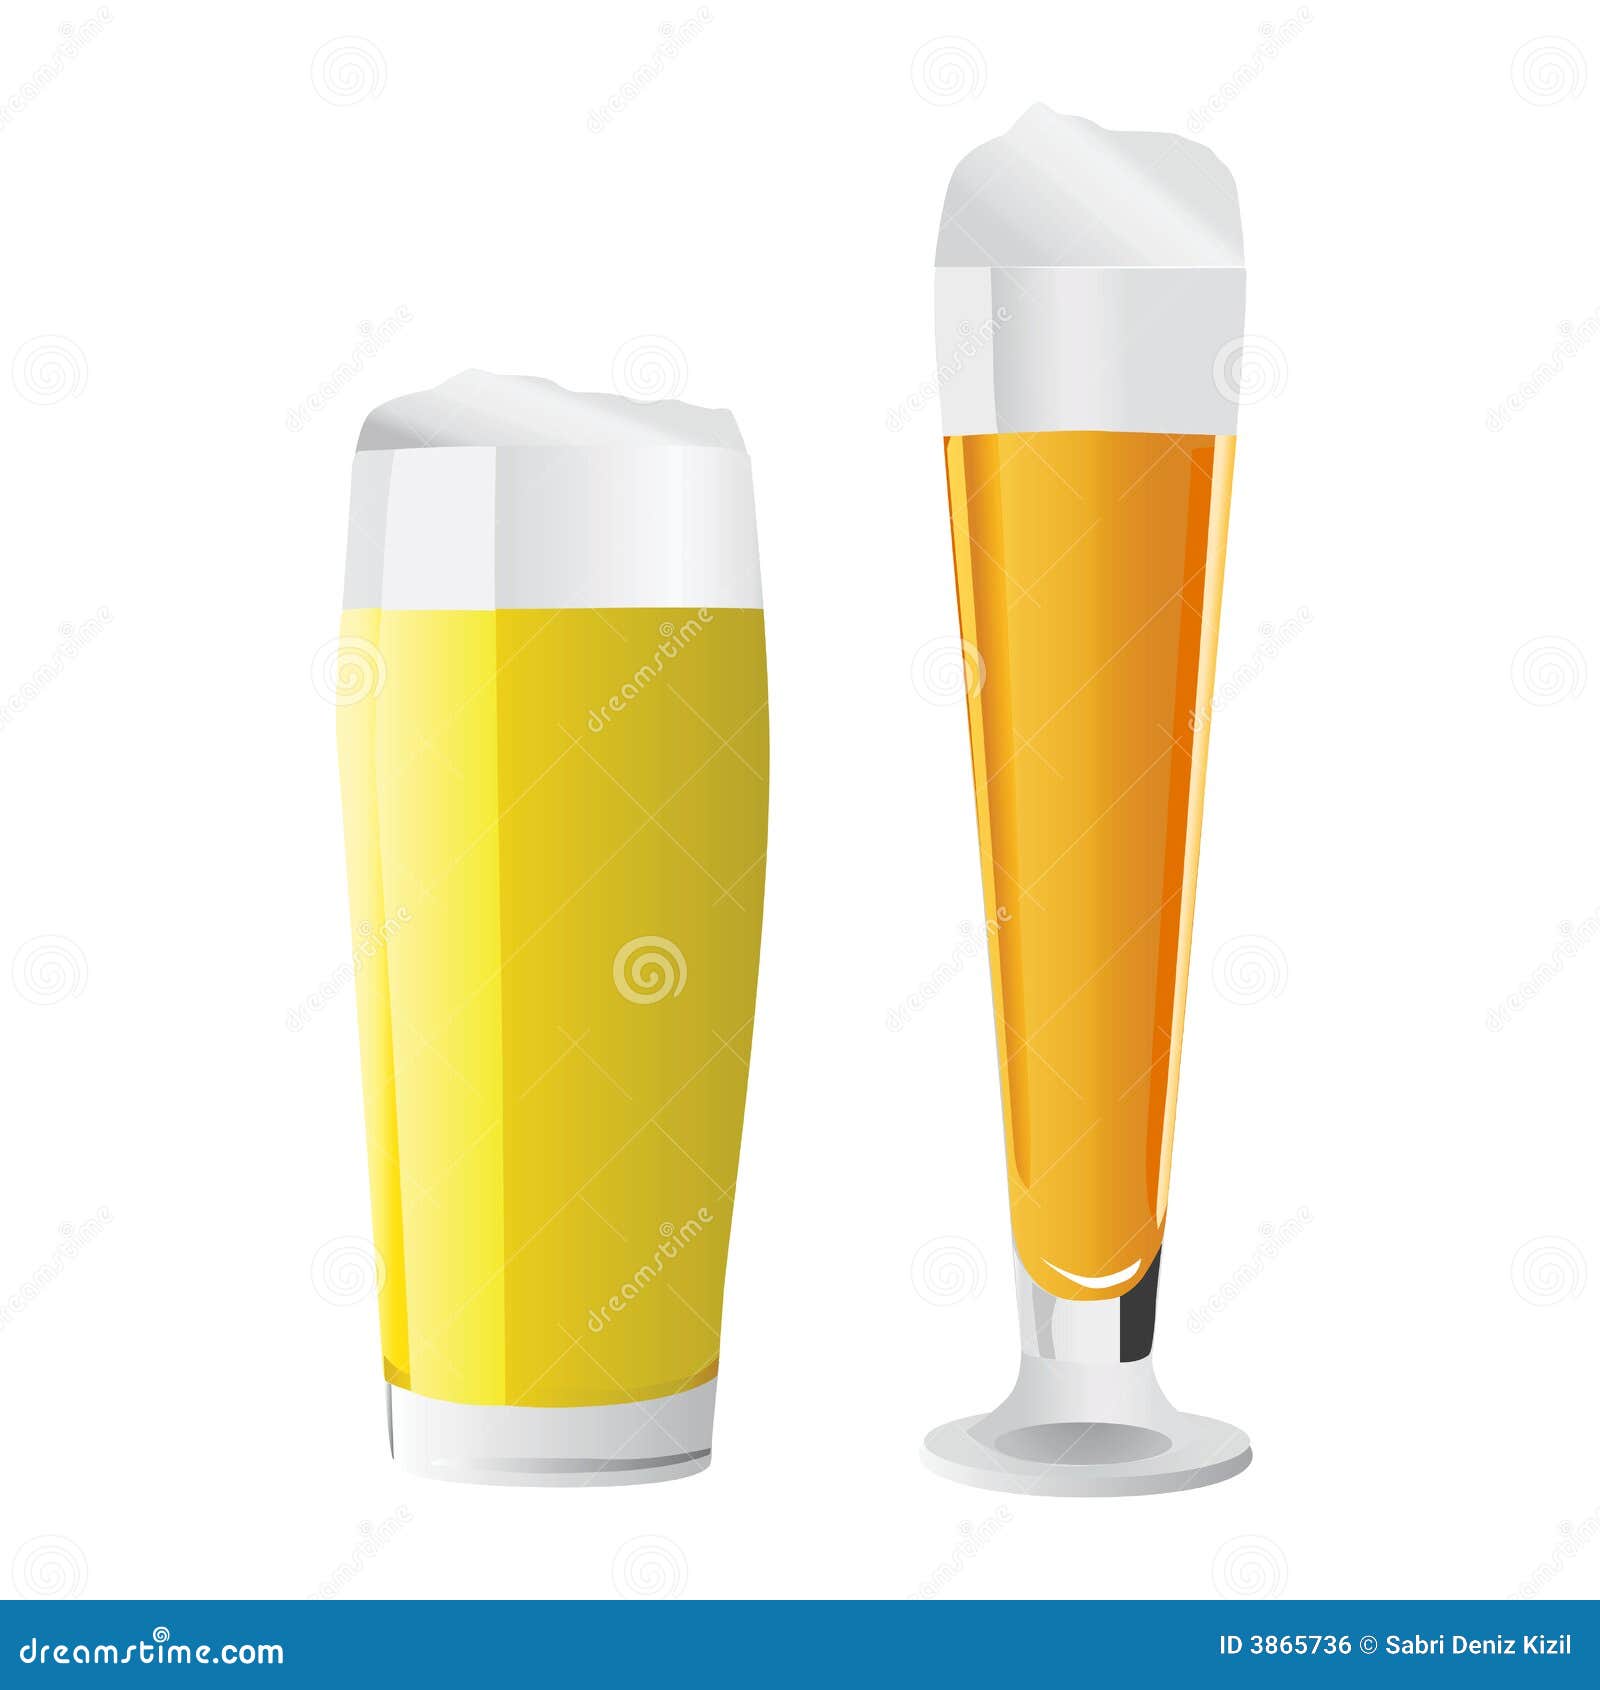 Beer Glass Vector Royalty Free Stock Image - Image: 3865736